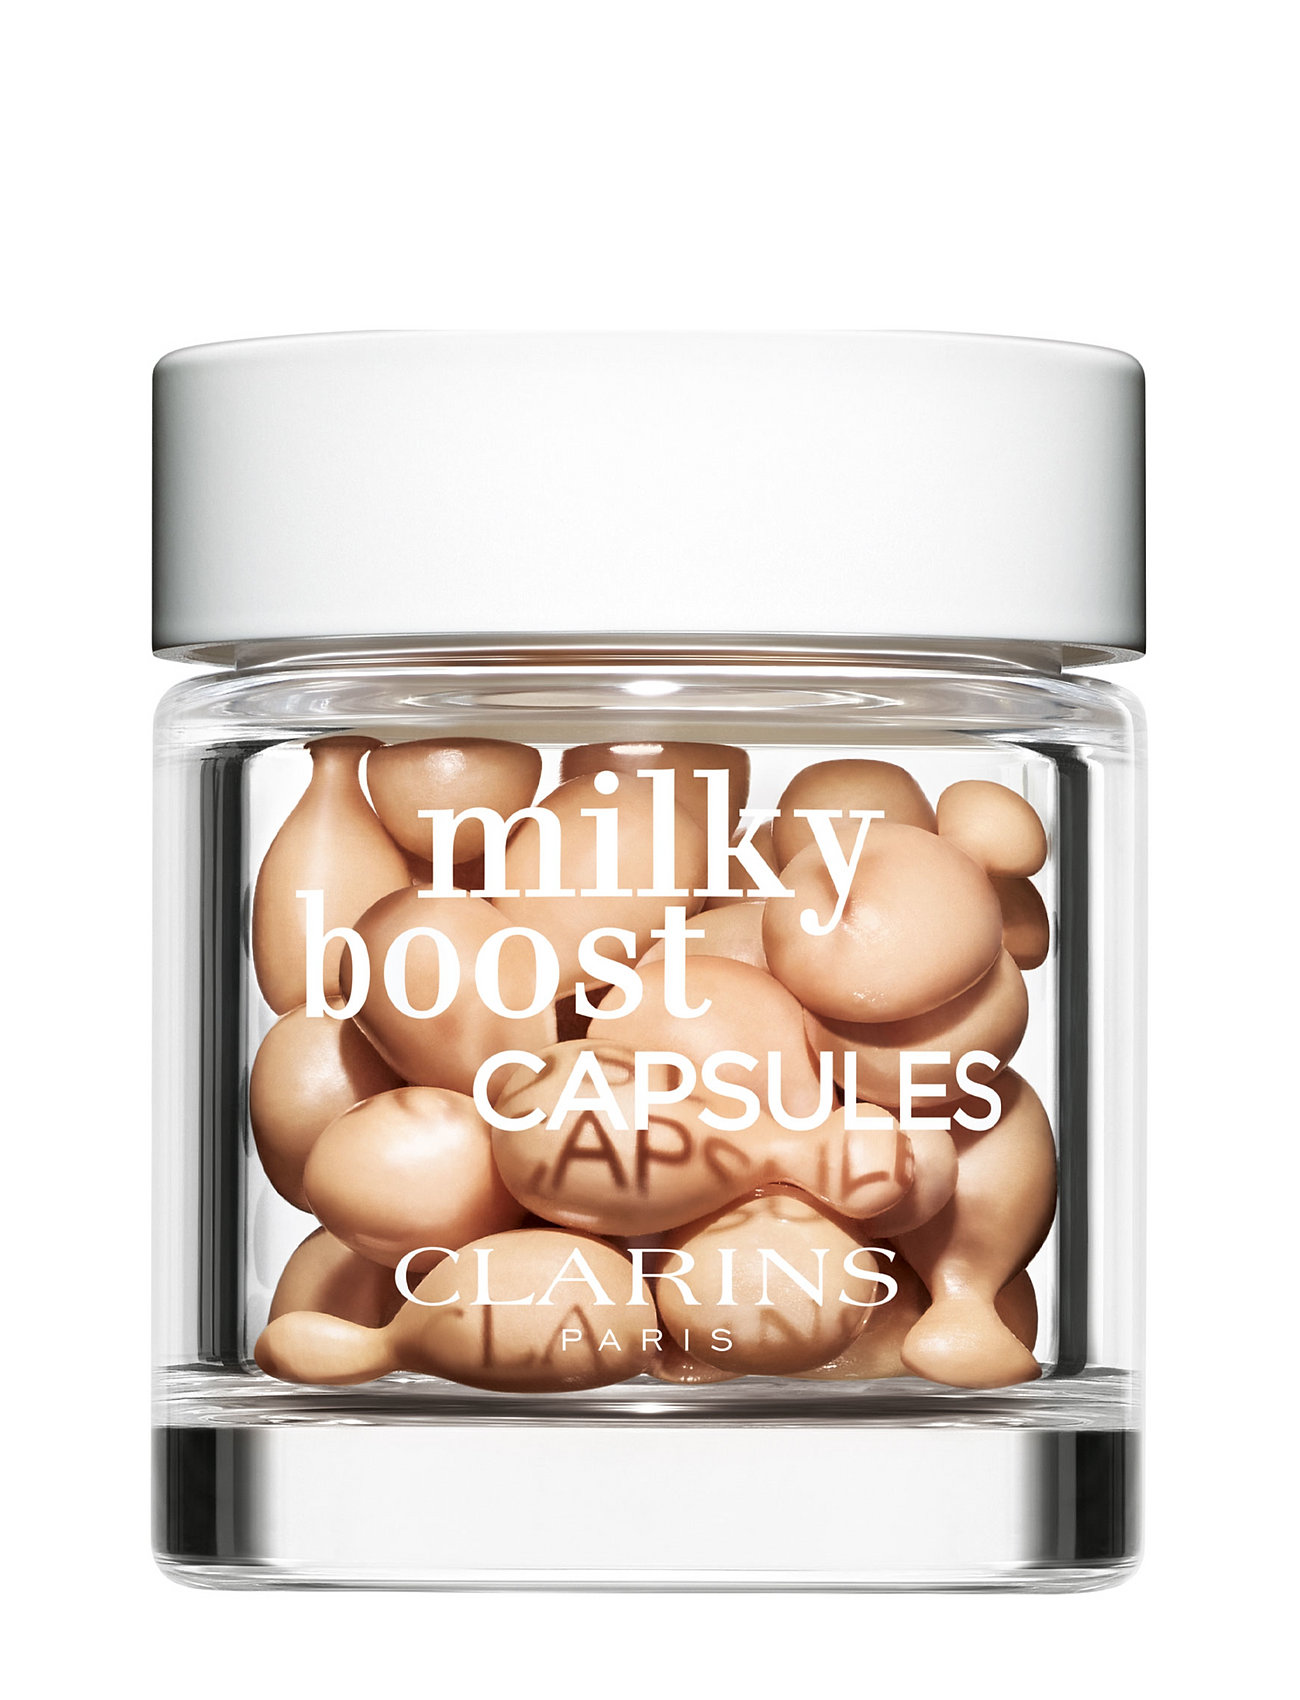 Milky Boost Capsules 02 Foundation Makeup Clarins